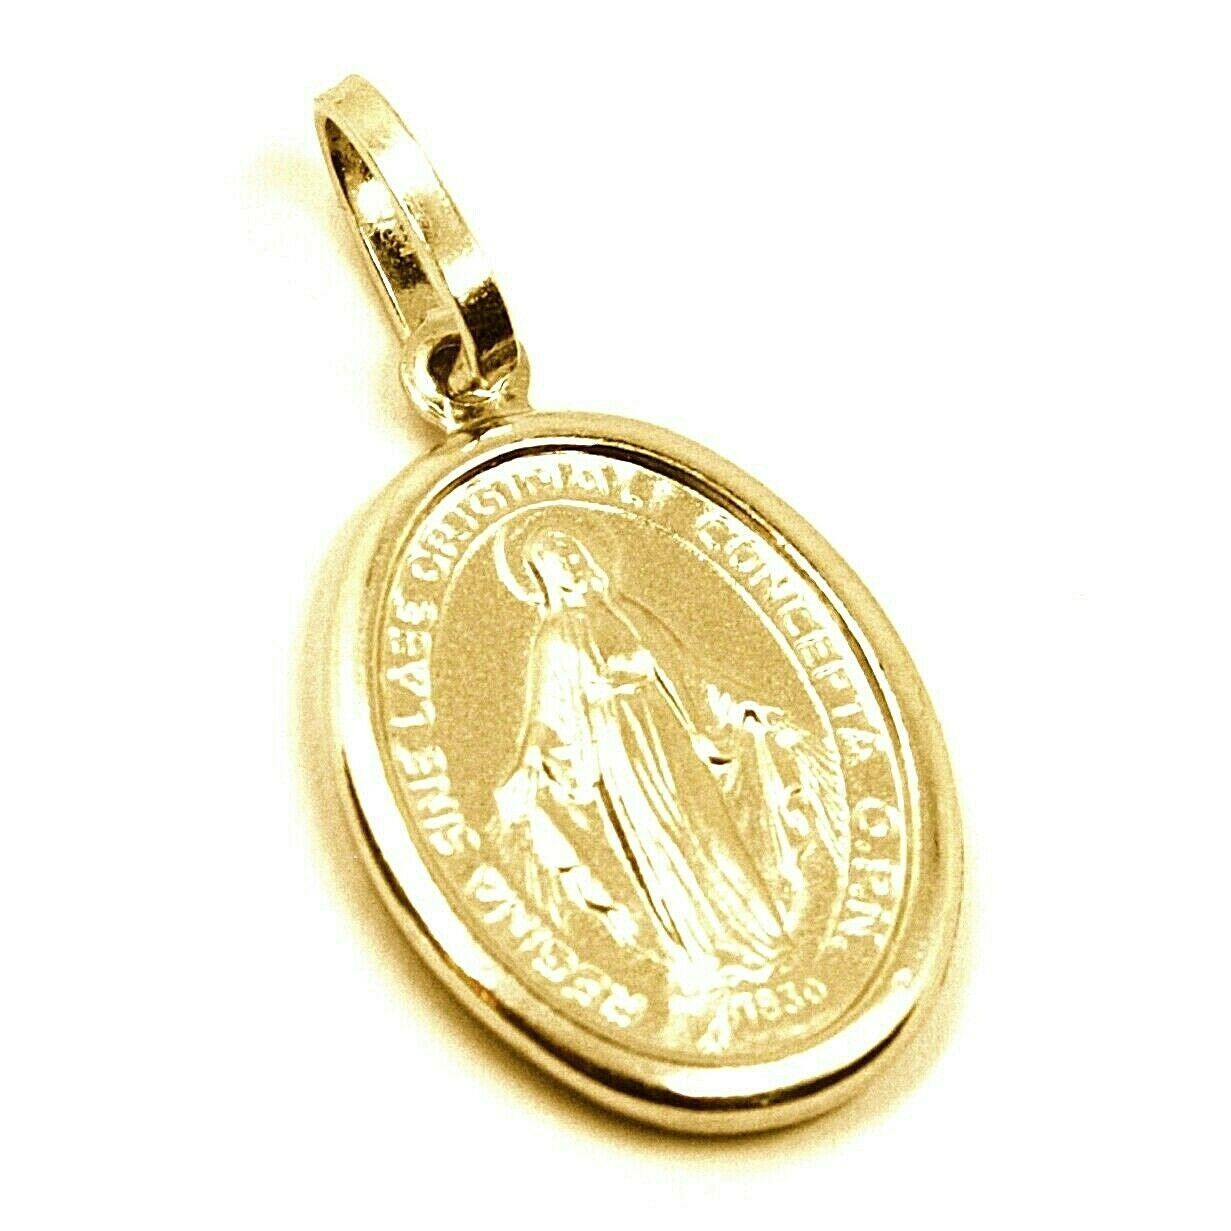 18K YELLOW GOLD MIRACULOUS MEDAL VIRGIN MARY MADONNA, 1.6 CM, 0.63 INCHES - $222.91